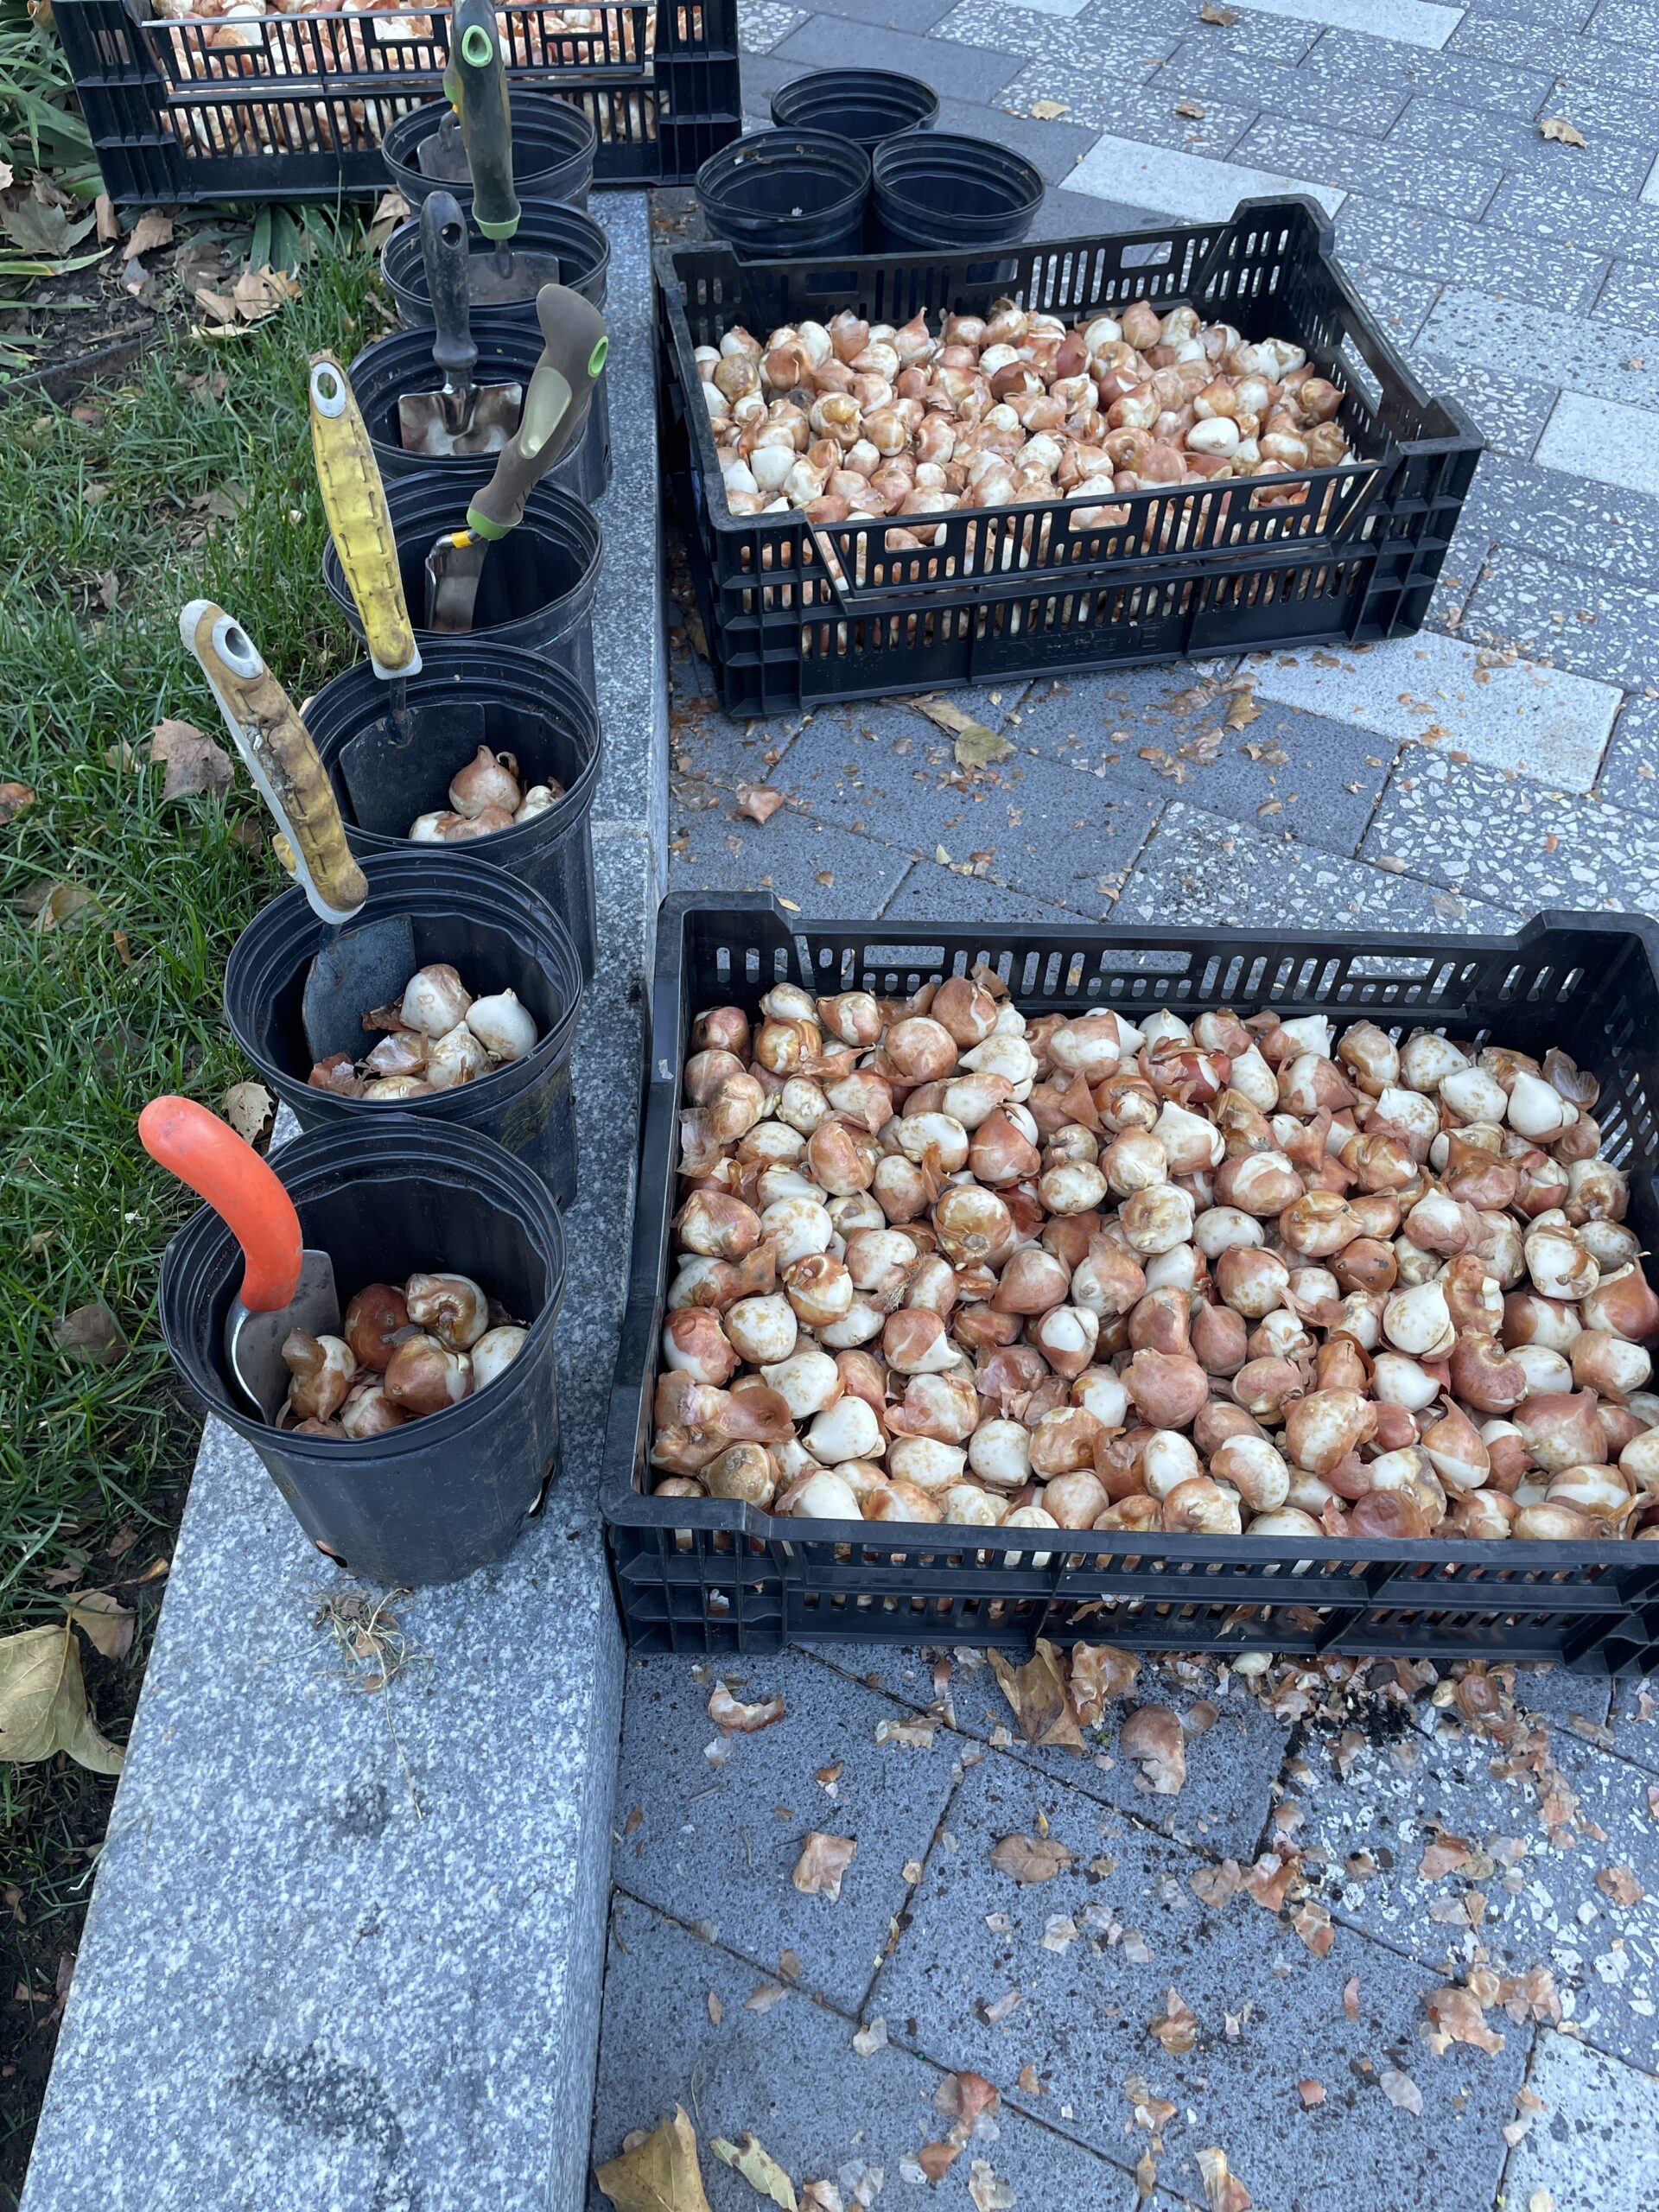 Containers and small buckets of plant bulbs